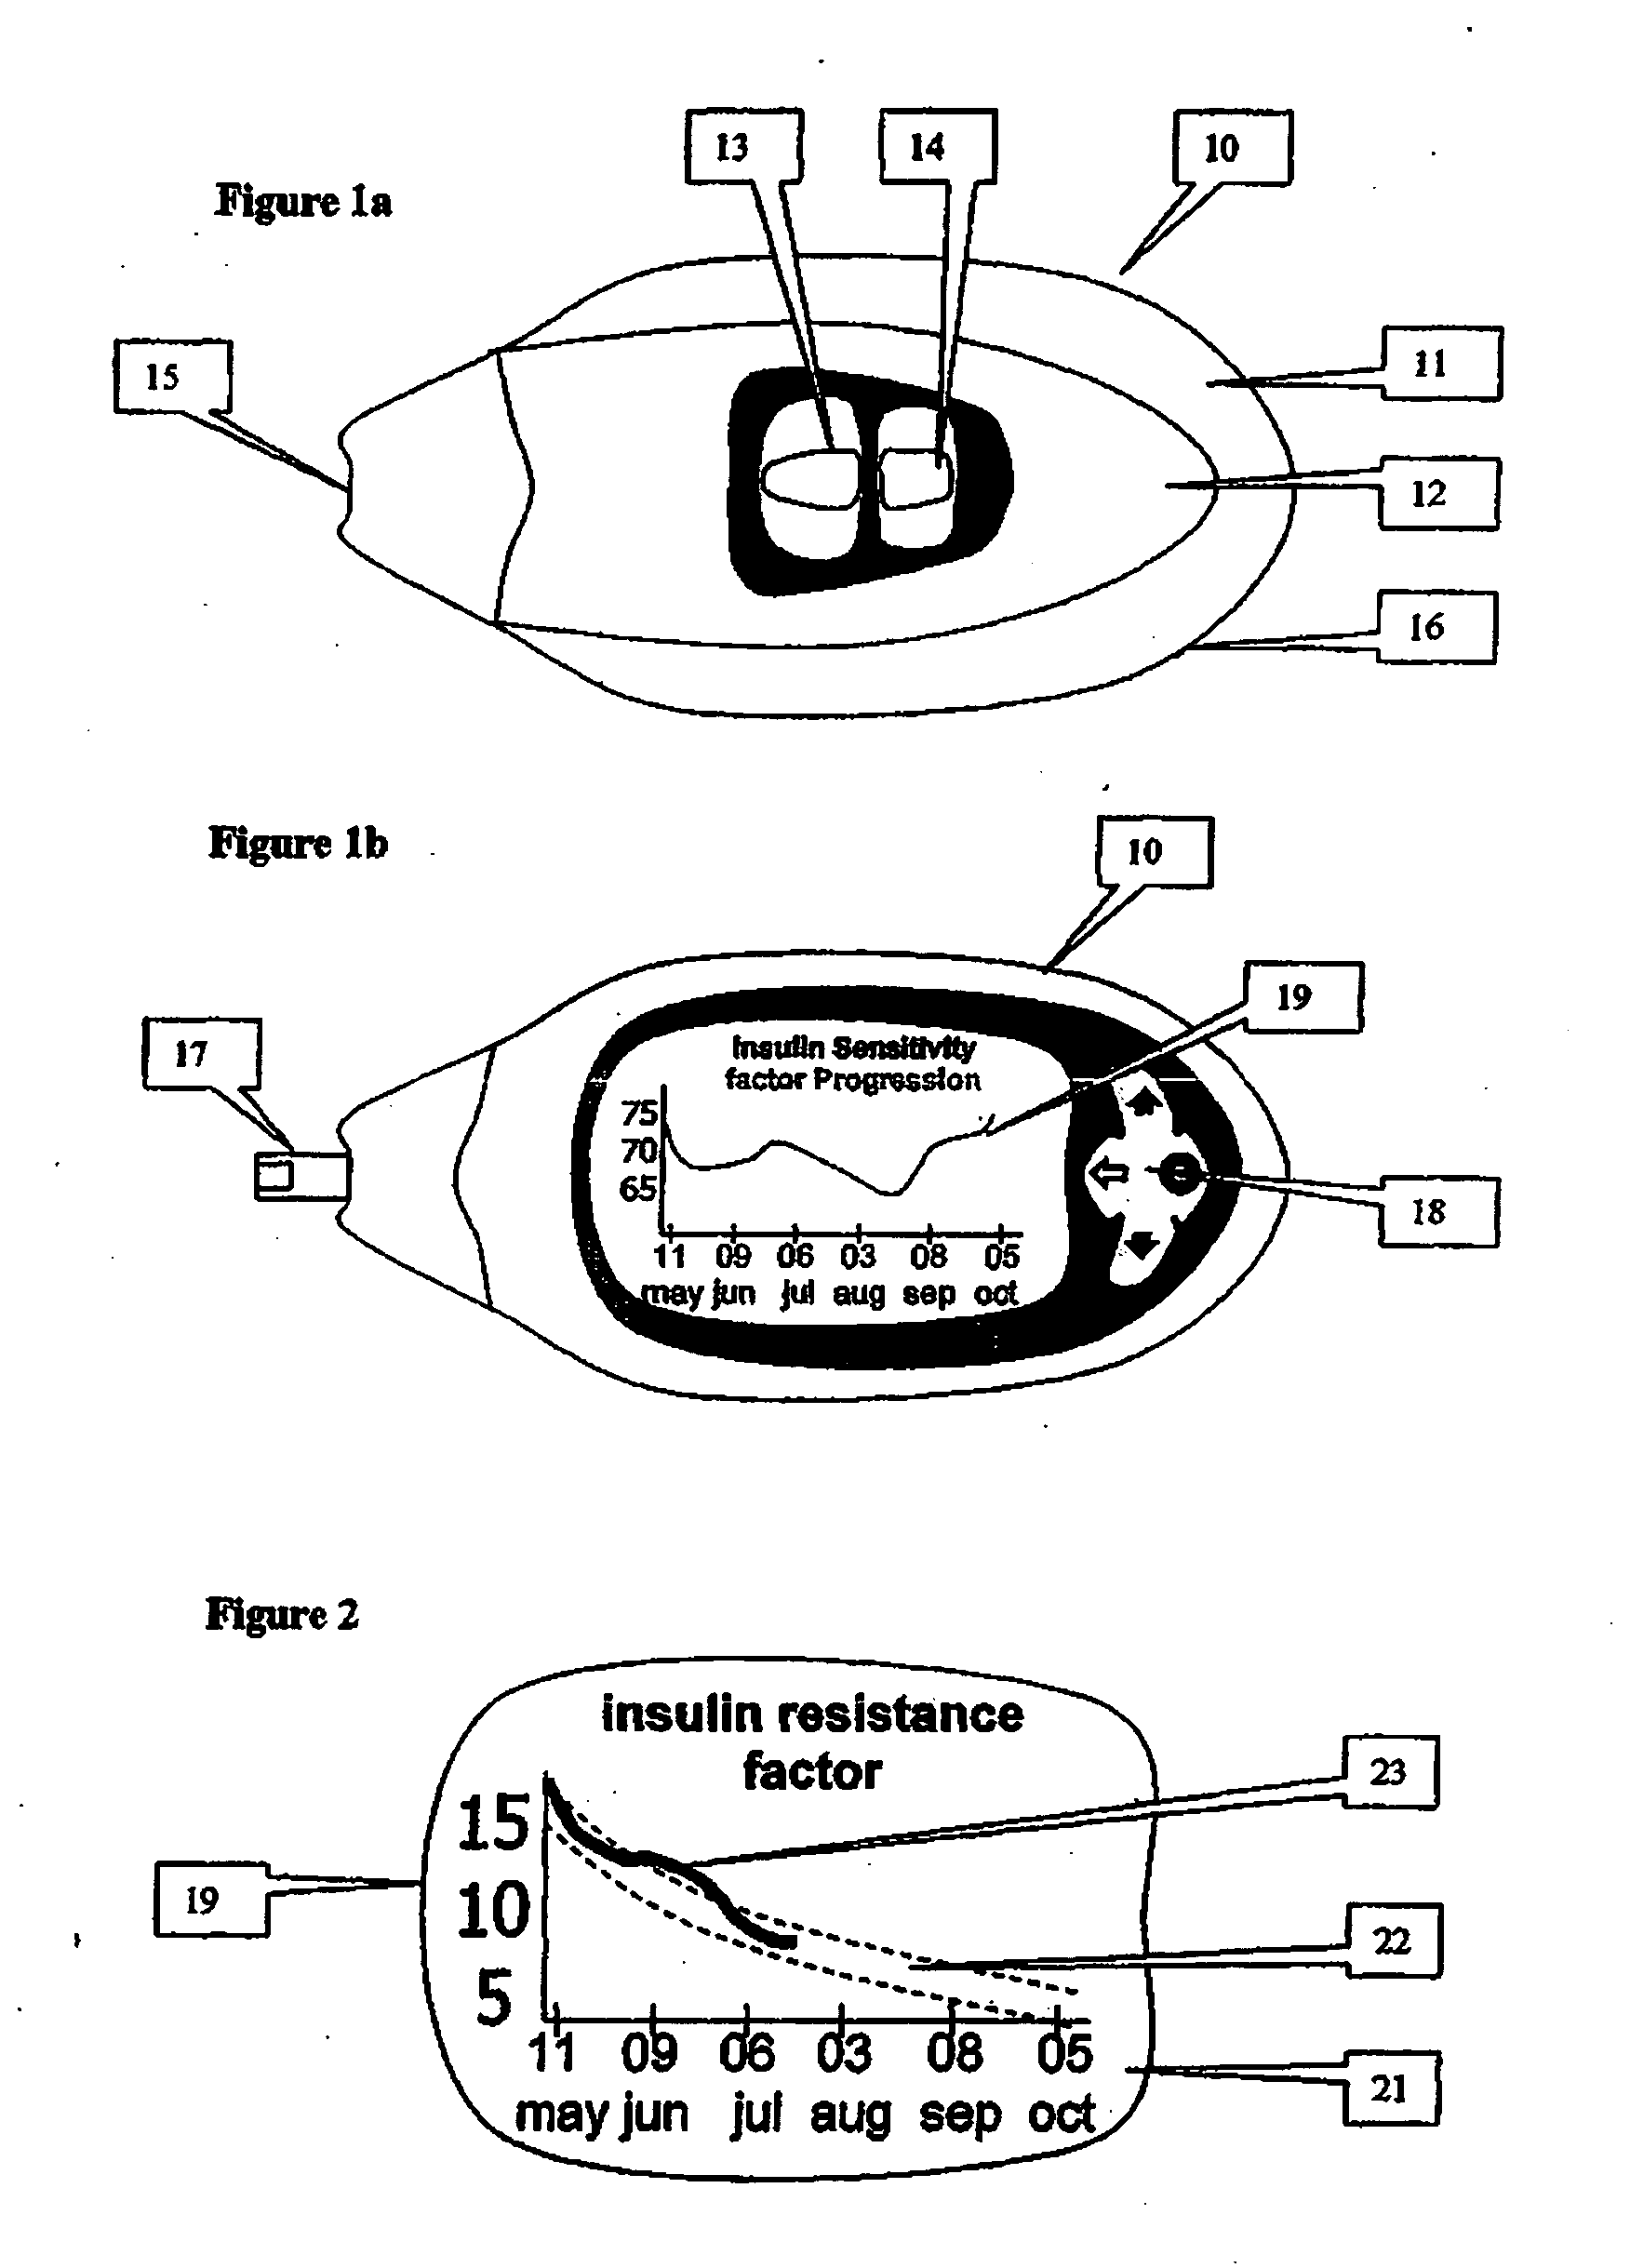 Method and device for utilizing analyte levels to assist in the treatment of diabetes